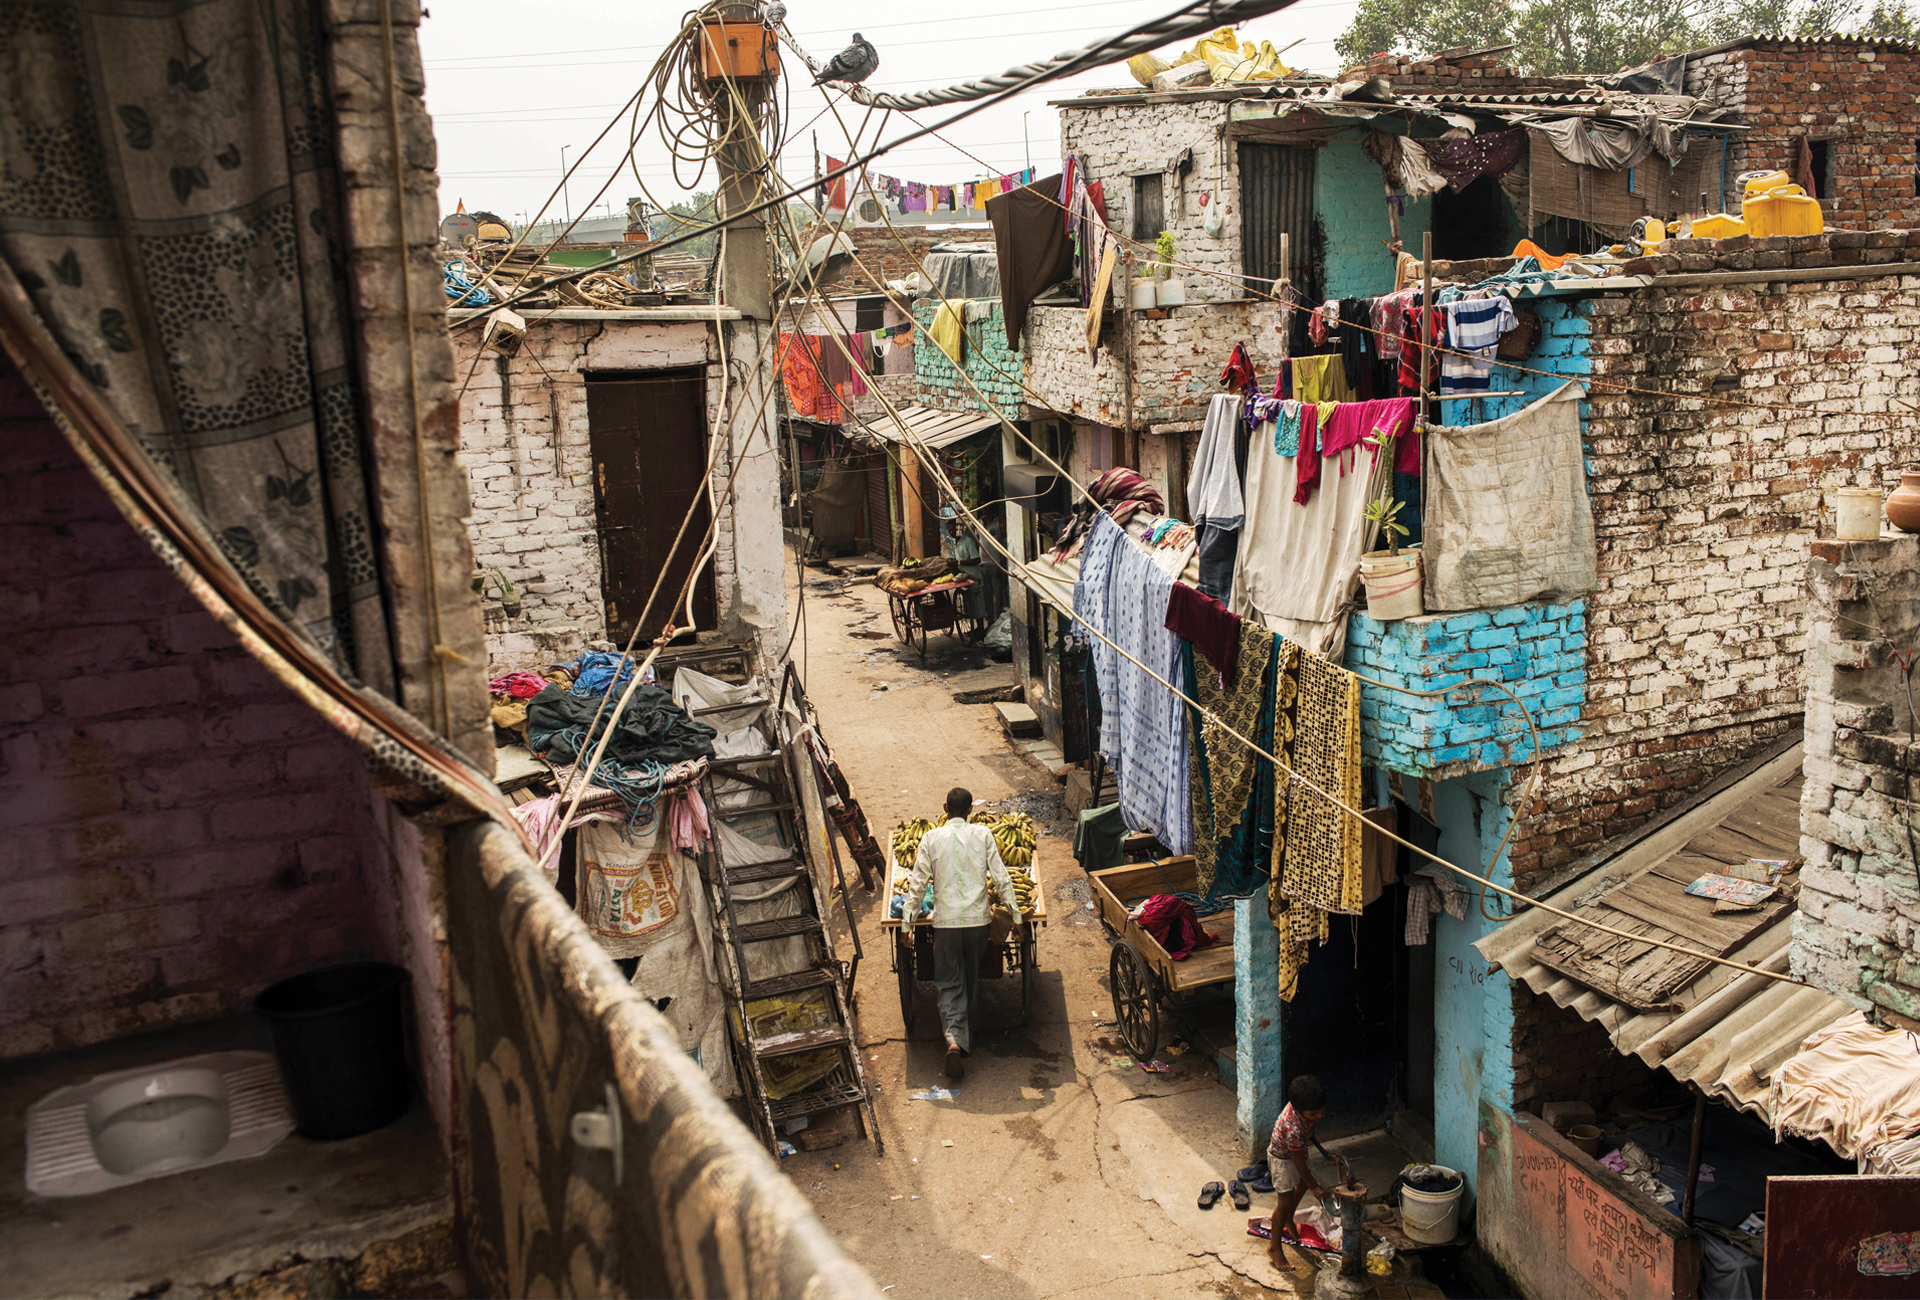 Photo from a balcony in Safeda Basti, India. The street scene below appears dirty and is crowded with laundry hanging from clotheslines while a lone man pushes a banana cart. To the immediate left, we see an open-air squat toilet overlooking a balcony.